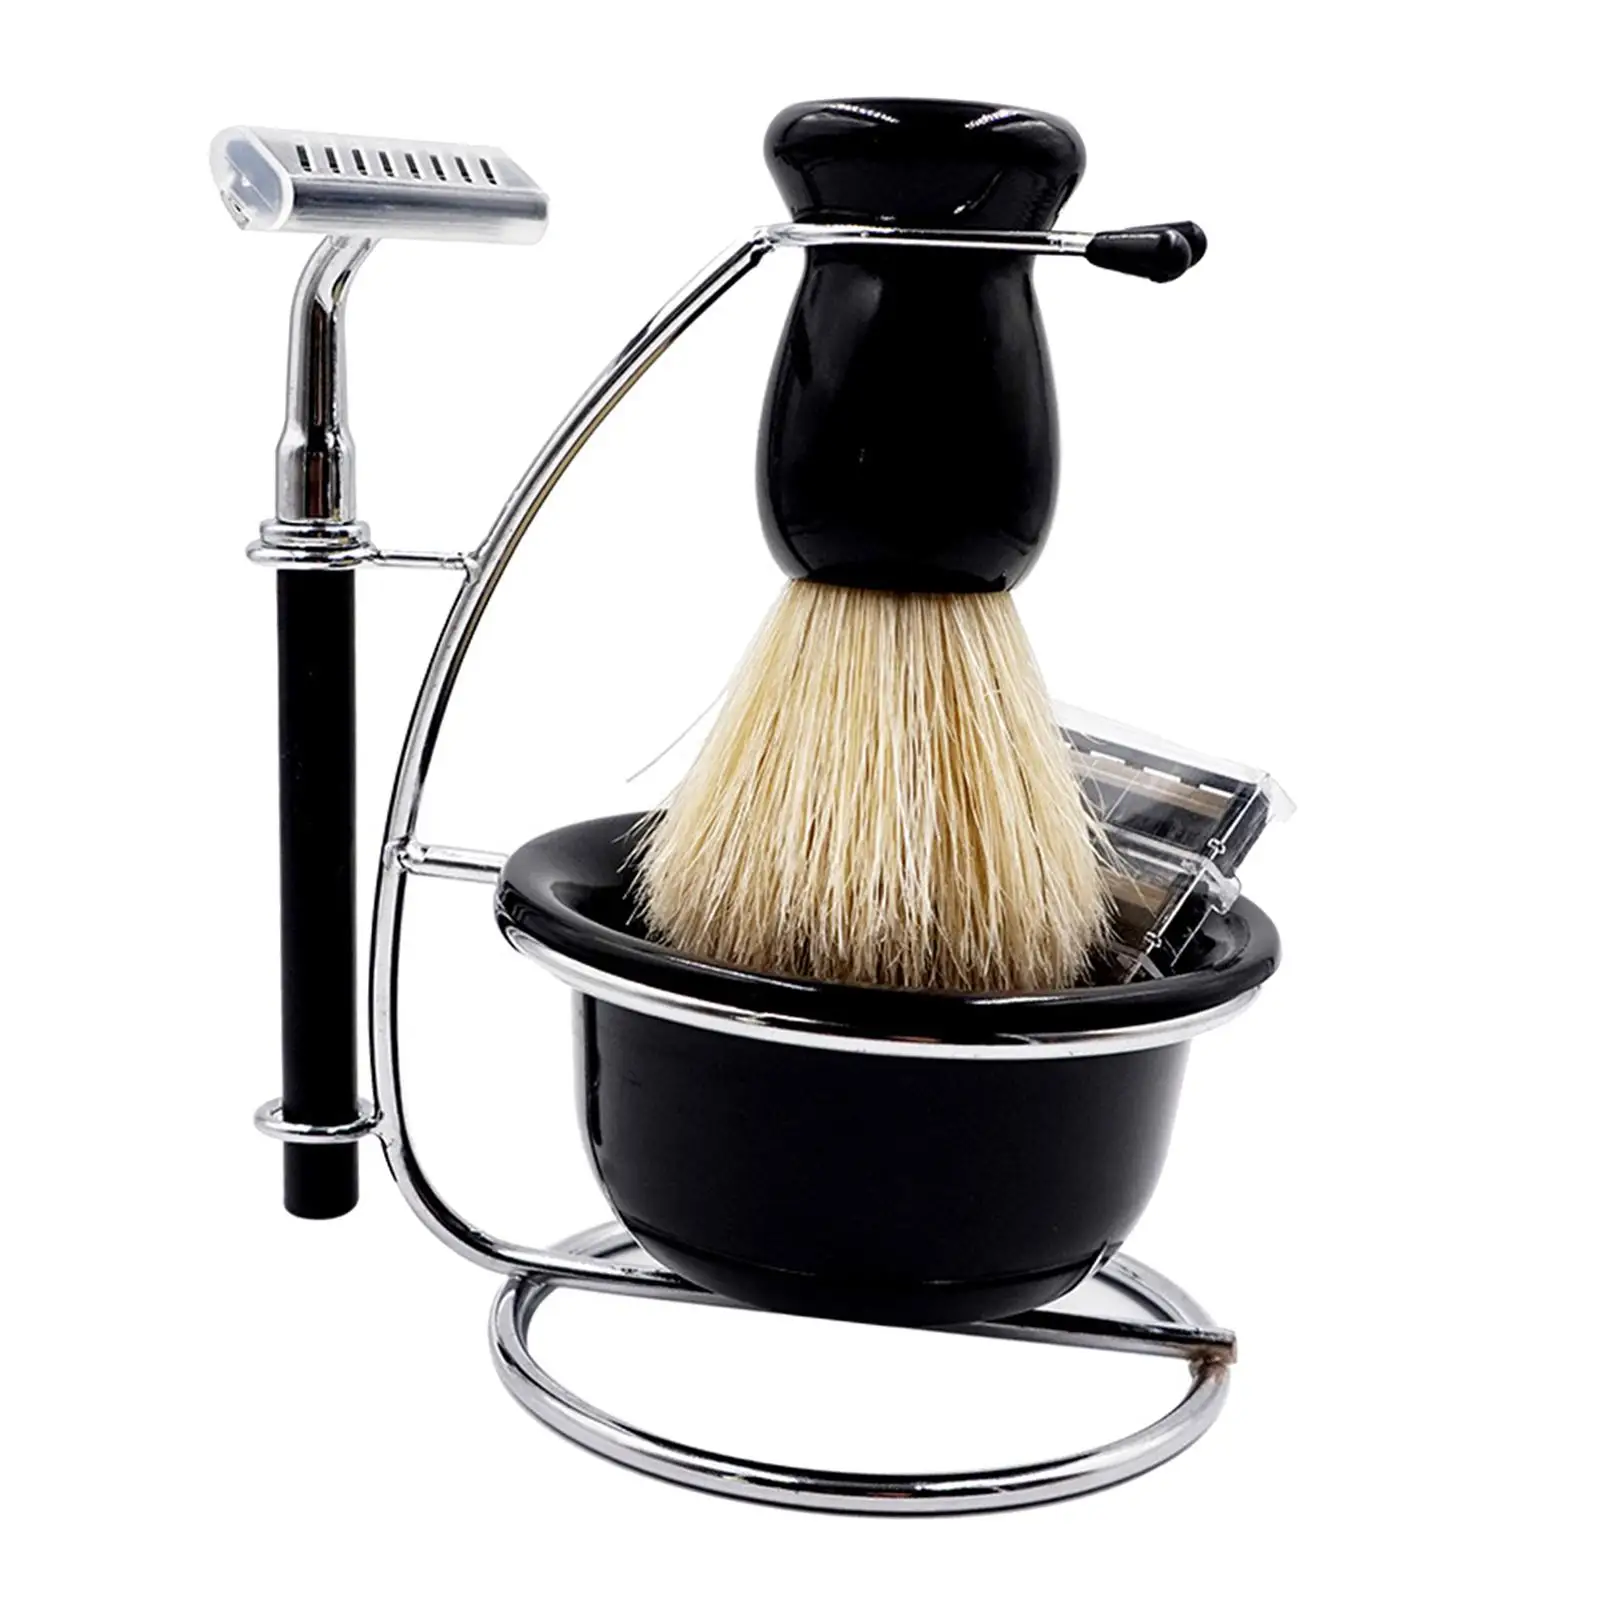 Men Shaving Set Manual Stand Brush Bowl Set Weighted Bottom Accessory